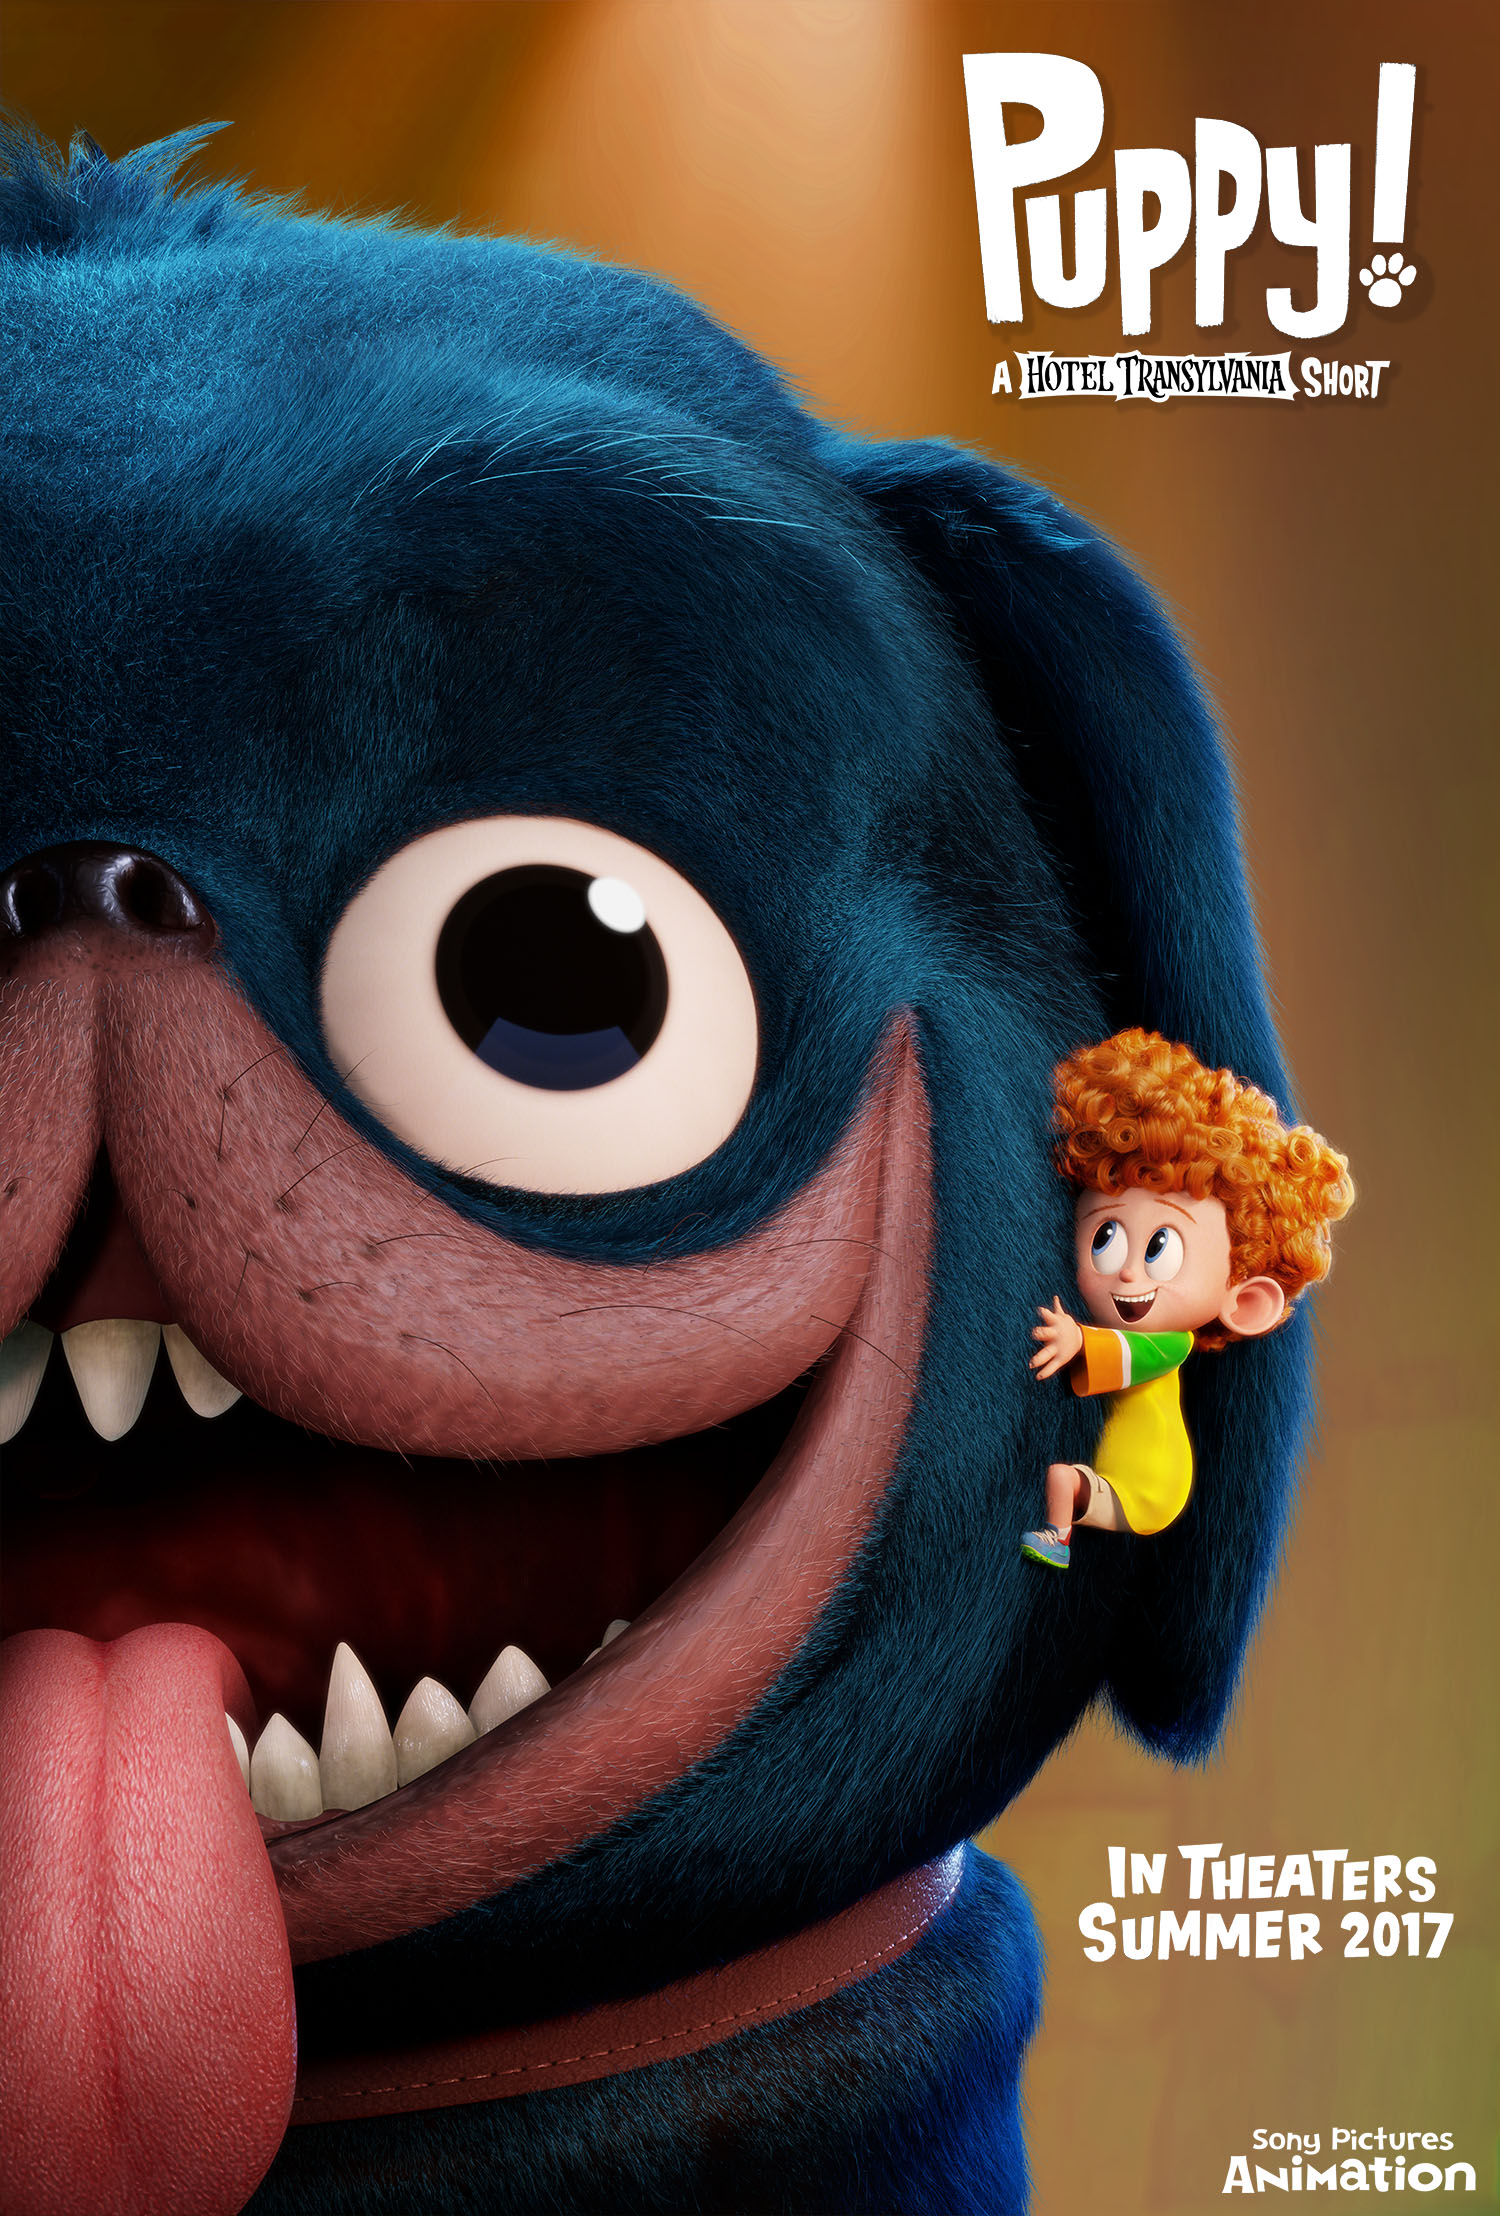 Poster for Hotel Transylvania short Puppy revealed â€“ Animated Views